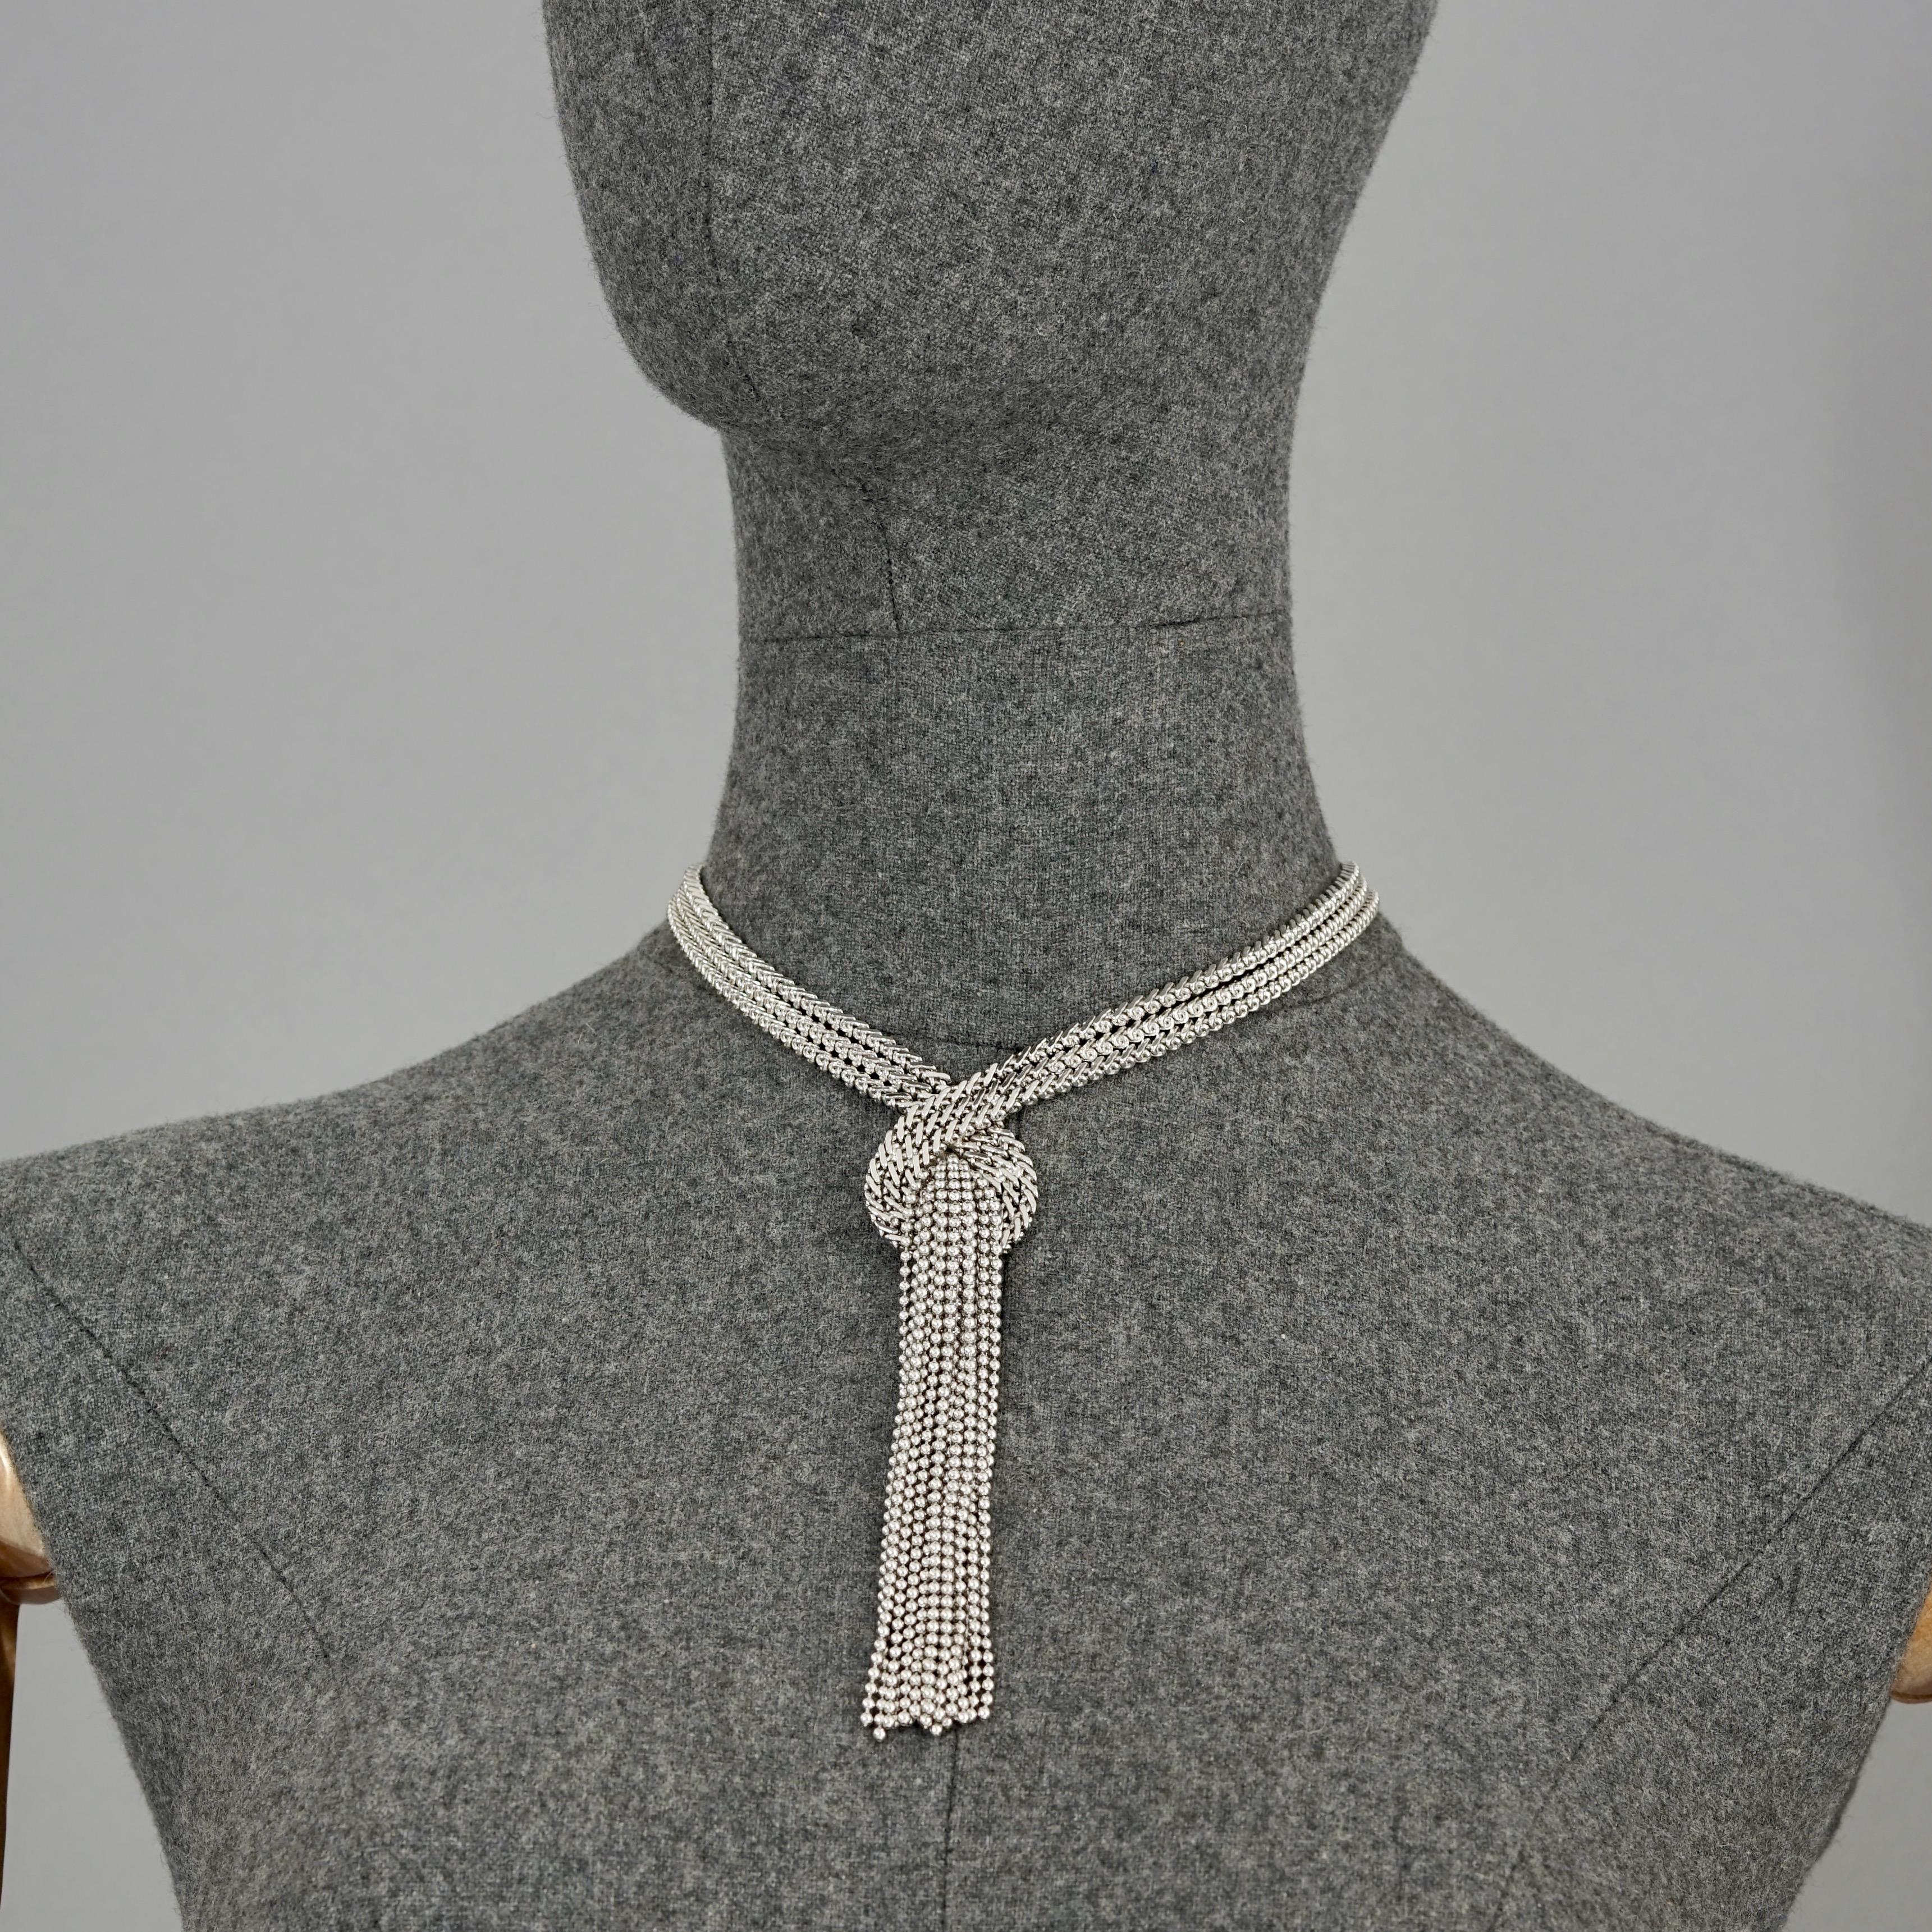 Vintage 1974 CHRISTIAN DIOR Cascading Multi Chain Tassel Silver Necklace

Measurements:
Center Height: 5.31 inches (13.5 cm)
Wearable Length: 15.94 inches (40.5 cm) maximum

Features:
- 100% Authentic CHRISTIAN DIOR.
- 3 Knotted chains with